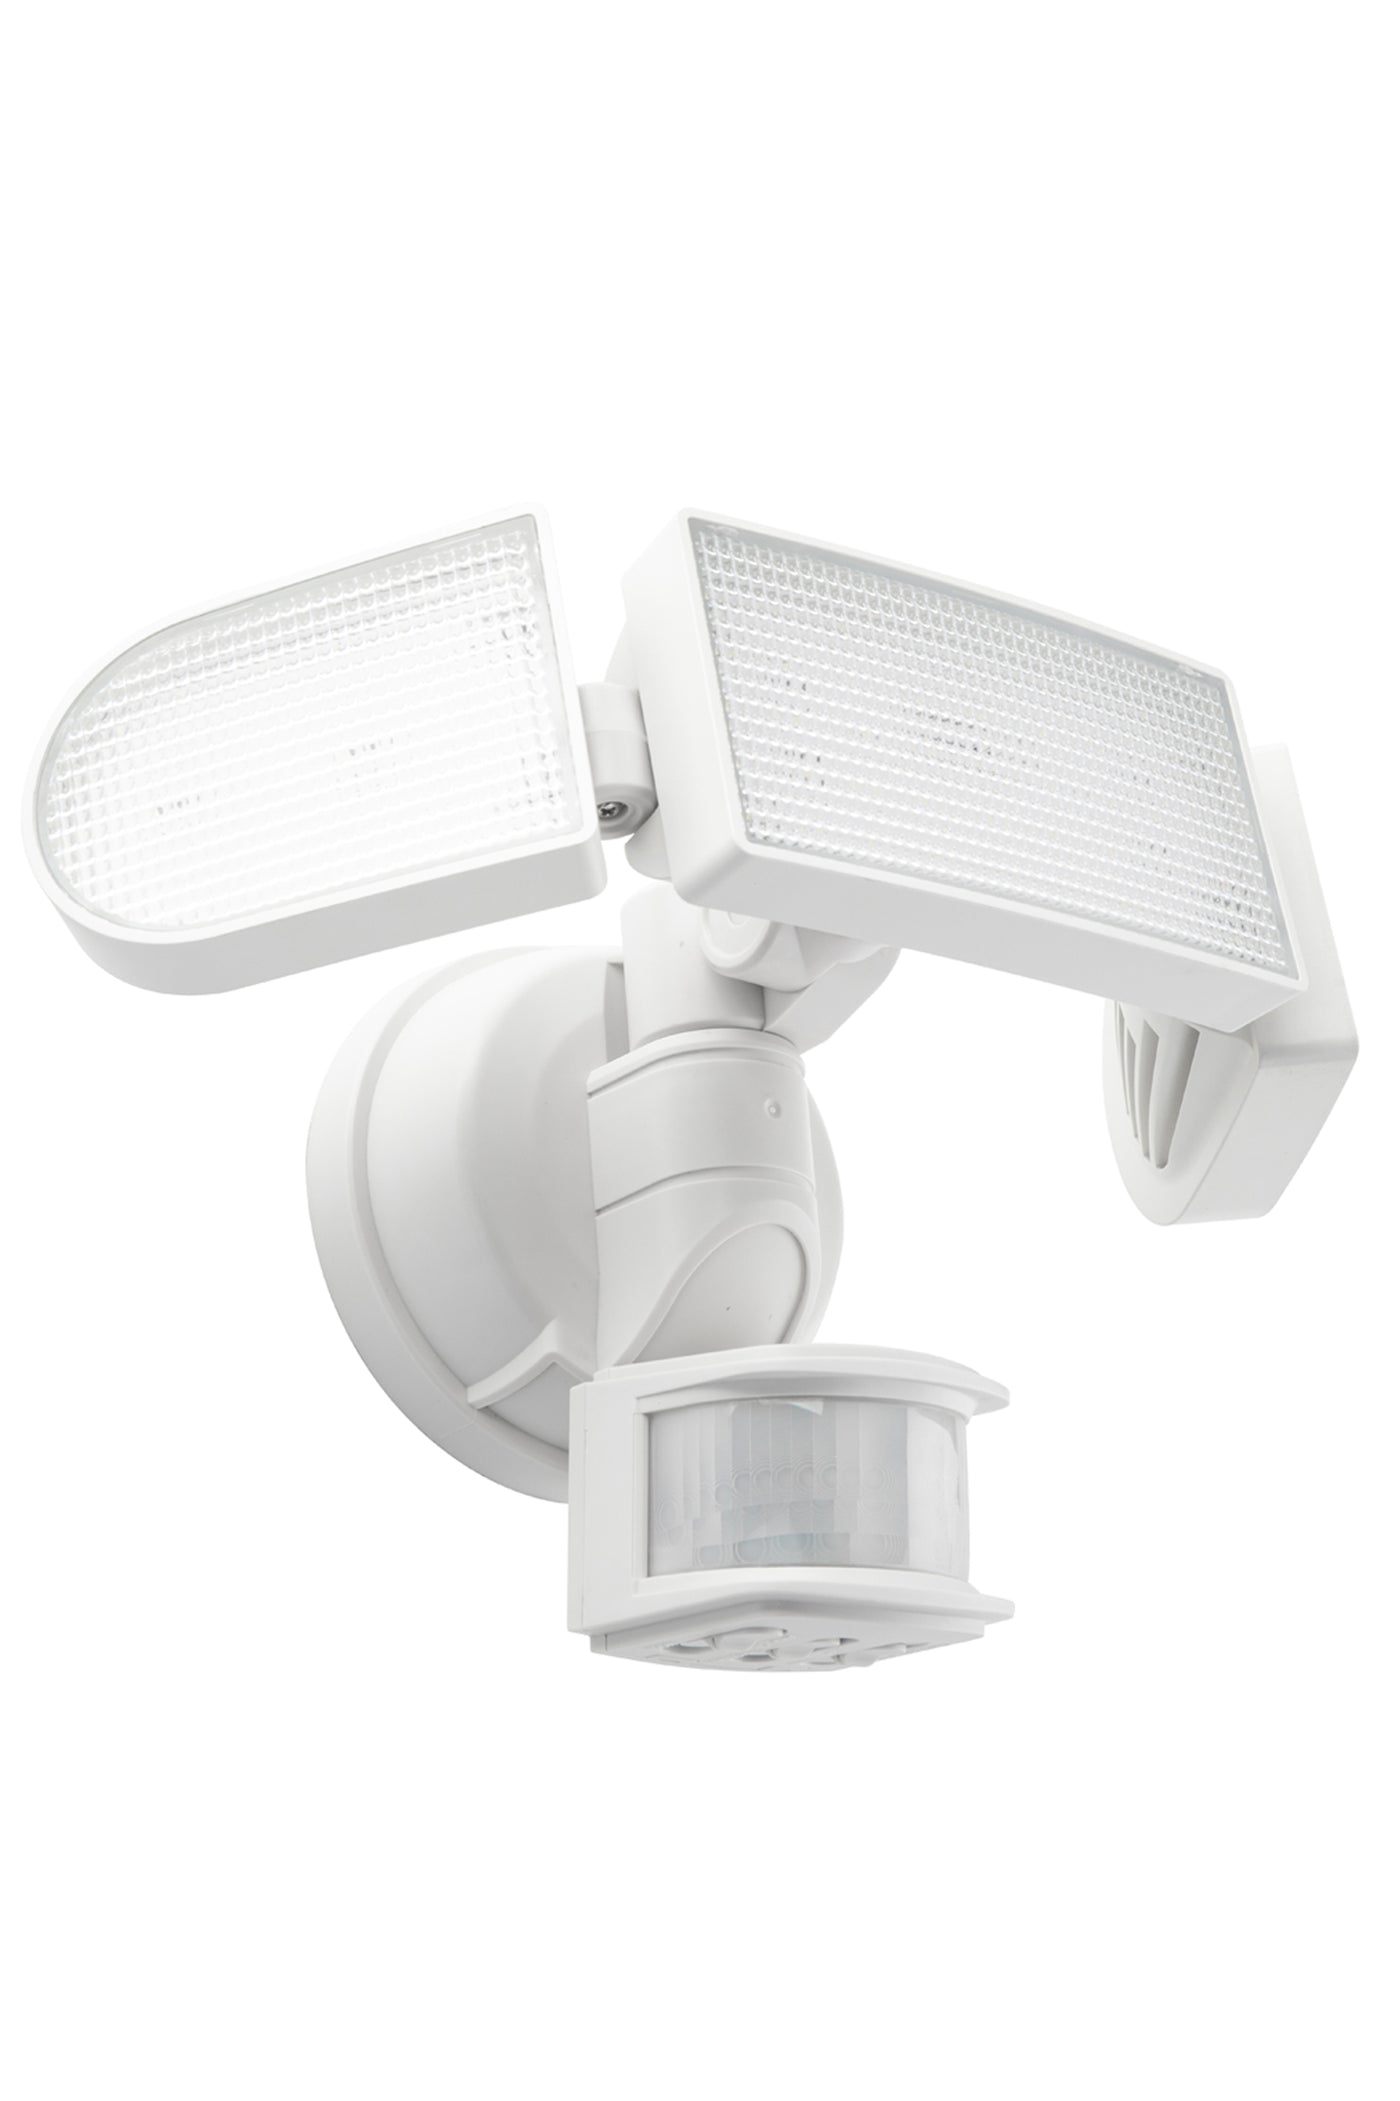 LUTEC-8 Packs, Solar Motion Sensor Light, with 3 Rotatable Heads. 1800LM 15W 5700K, Dusk to Dawn, White